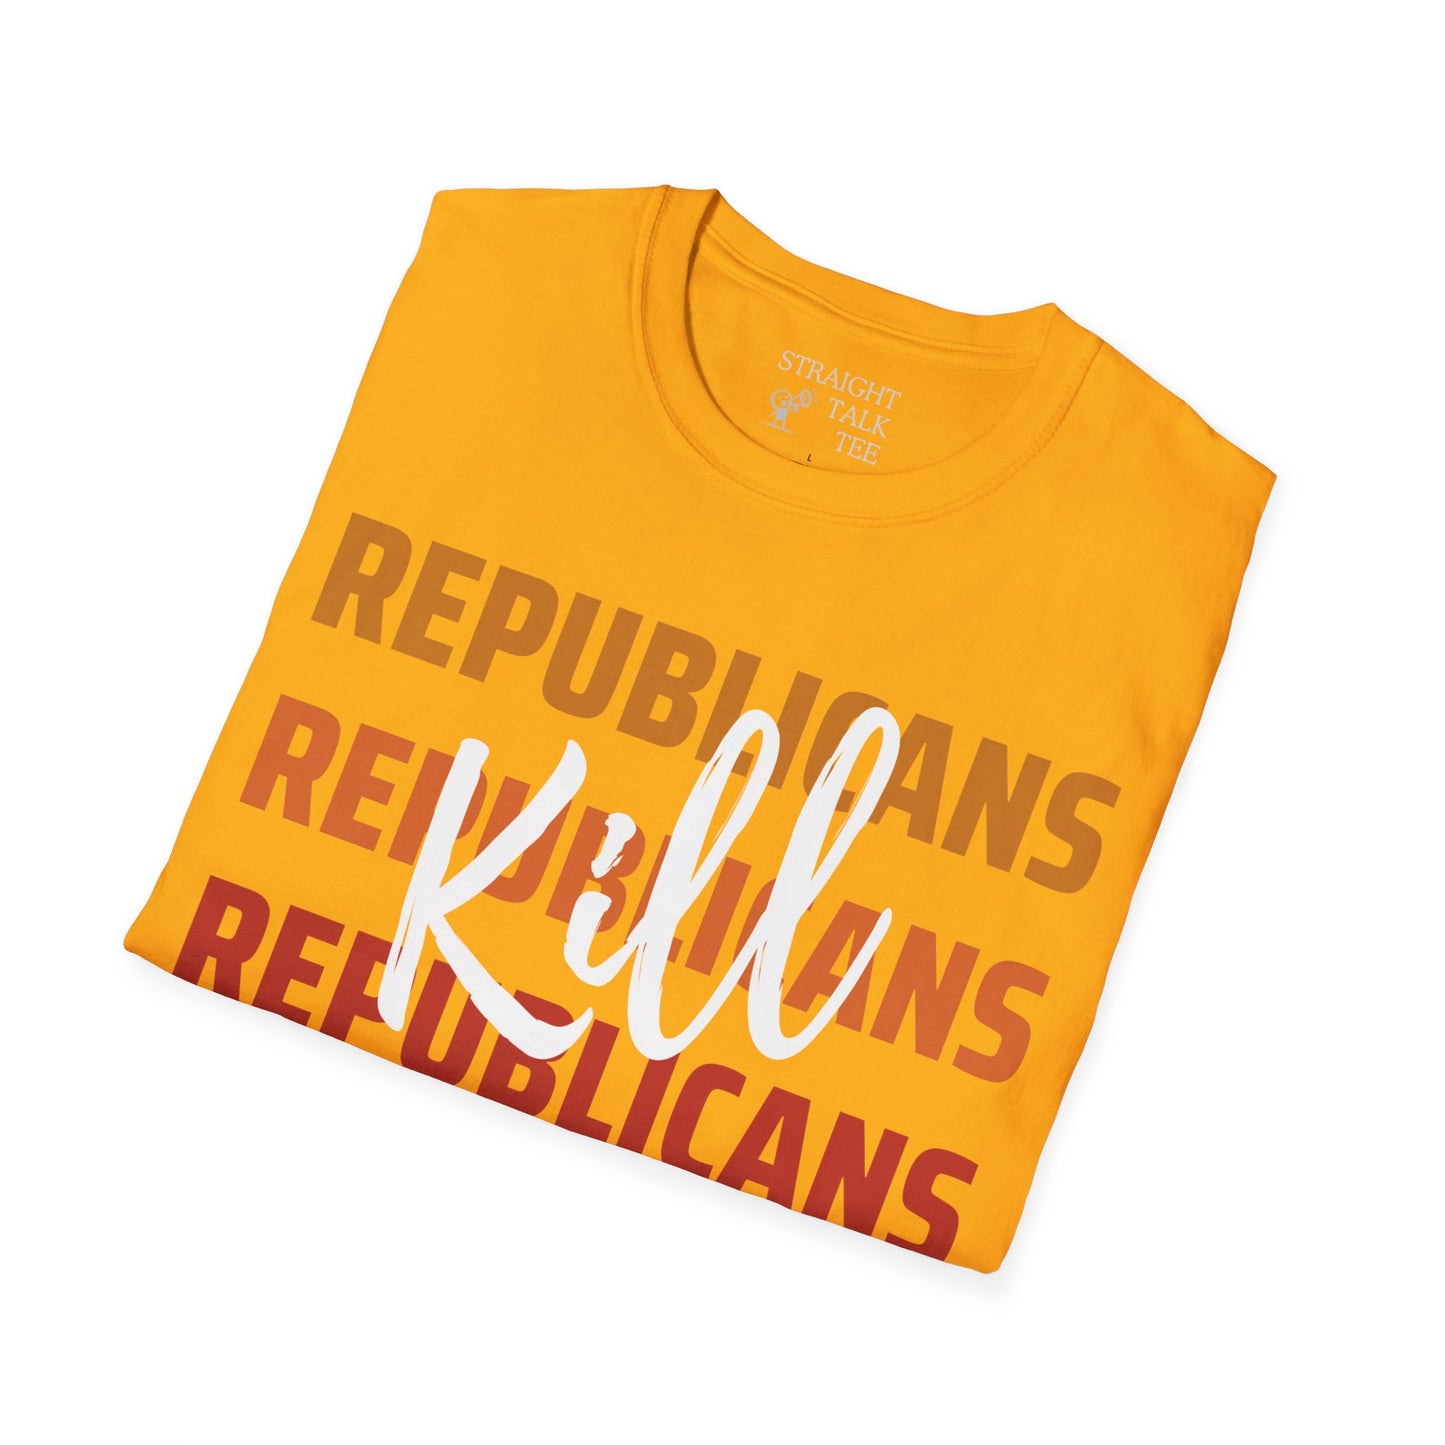 Republicans Kill Soft Style t-shirt |unisex| Bold Political Statement! For the Most Committed to Truth Telling!